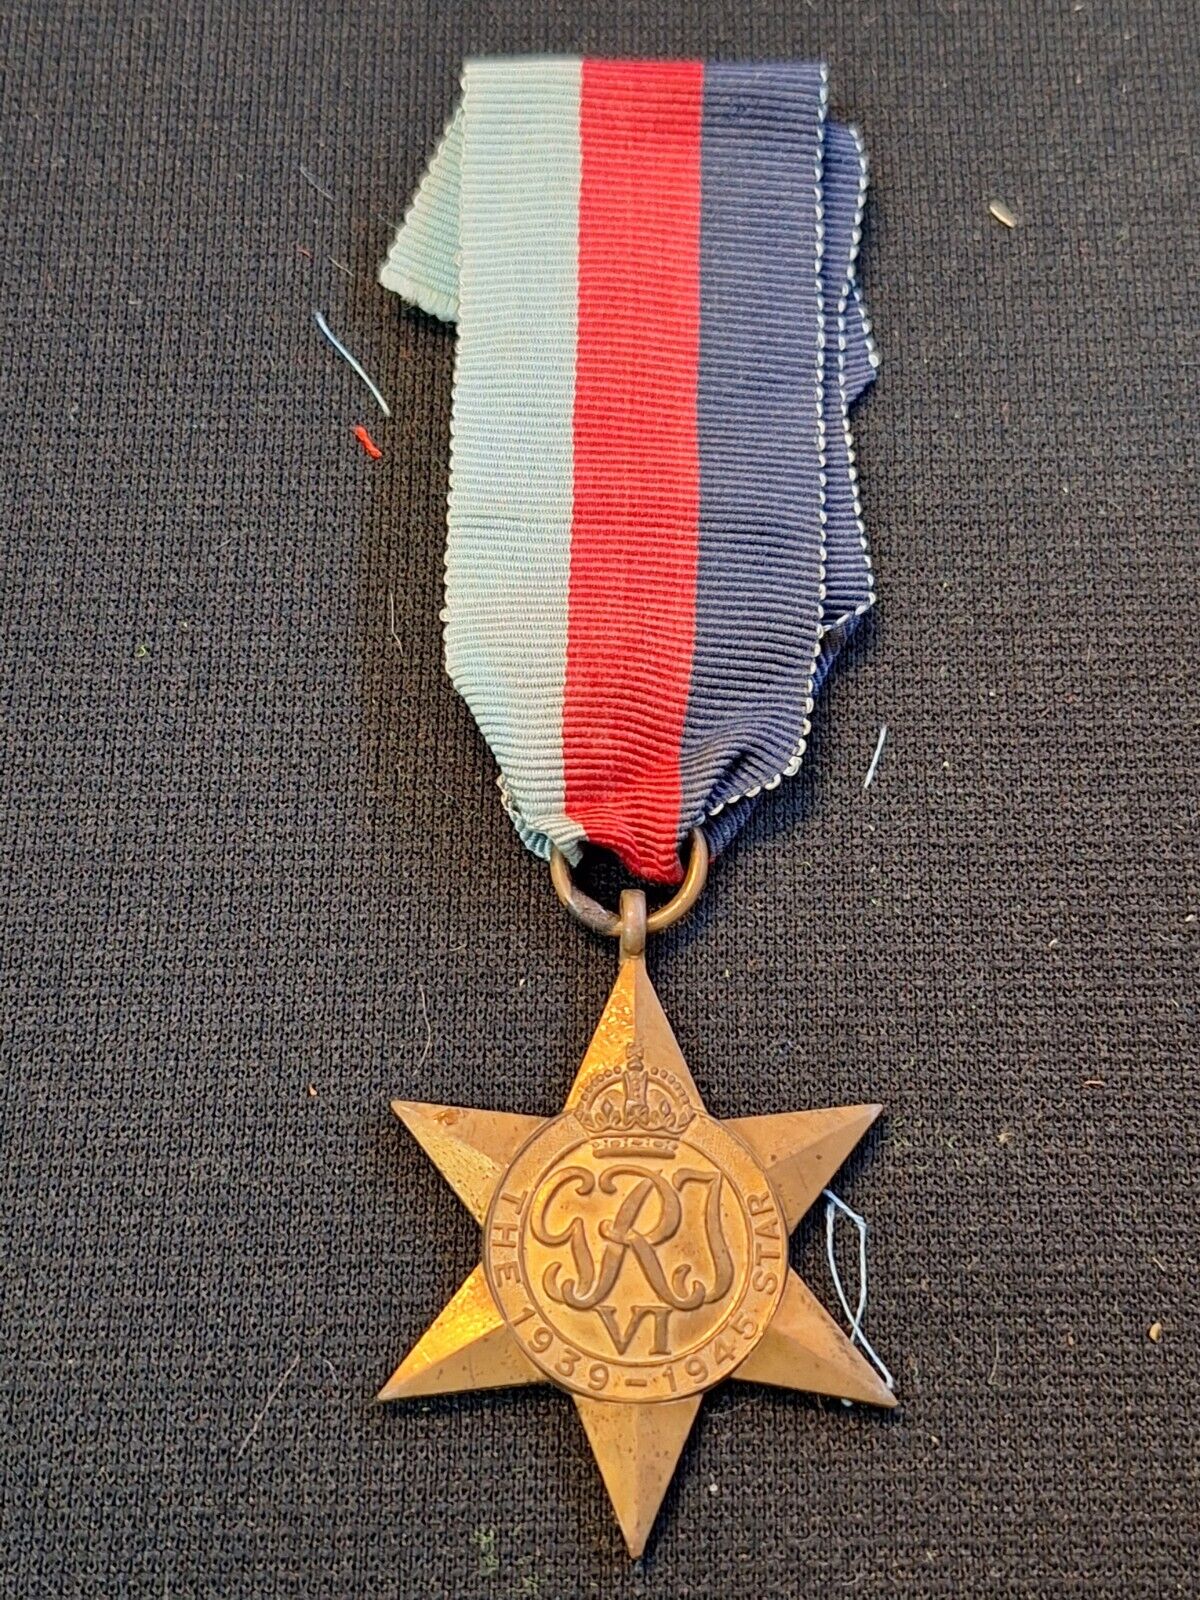 WW2 1939 45 STAR MEDAL FULL SIZE WITH RIBBON ORIGINAL